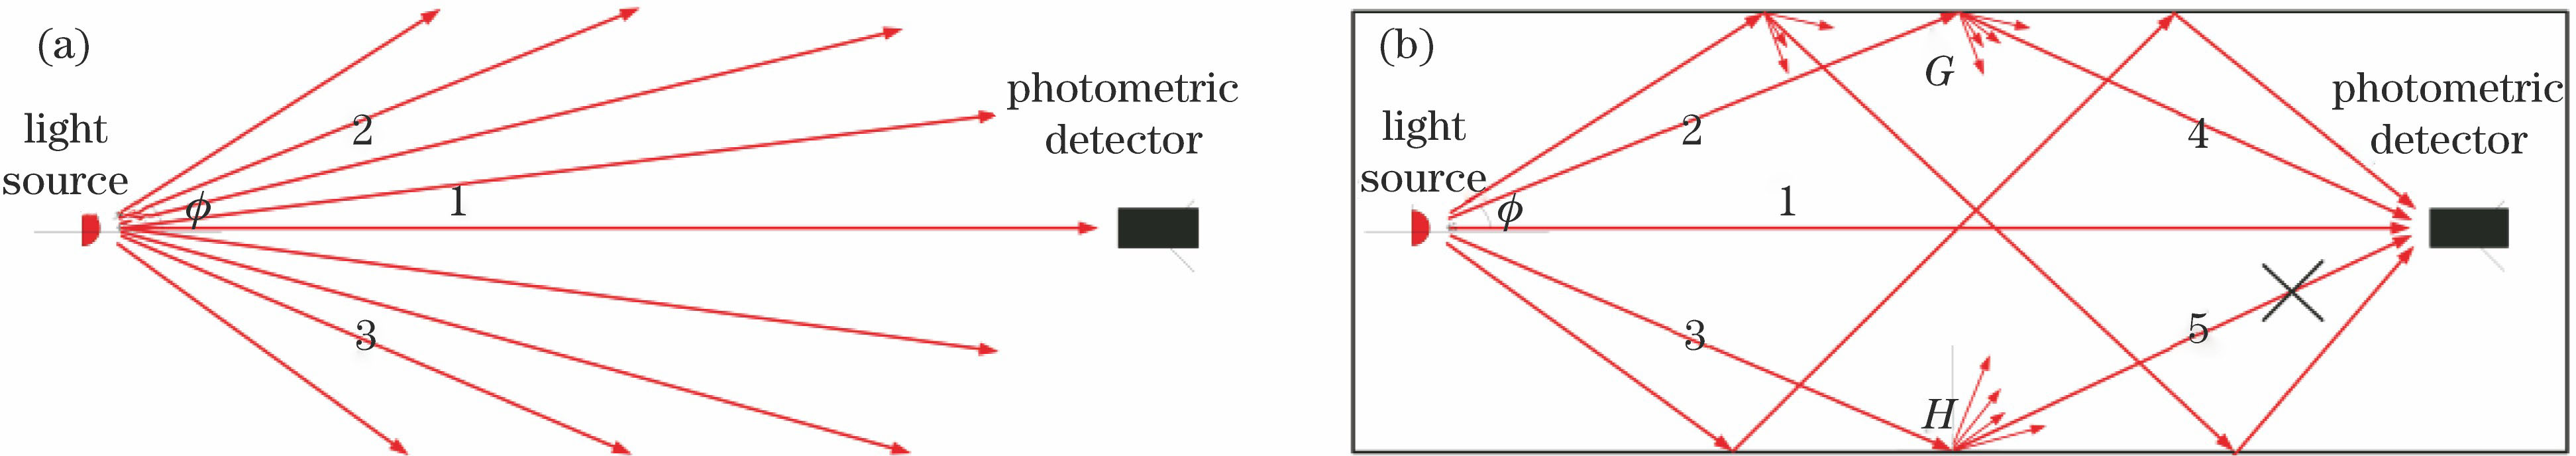 Tracing analysis of stray light effect in photometric measurement system. (a) Optical ray in ideal photometric measurement system; (b) optical ray in general photometric measurement system